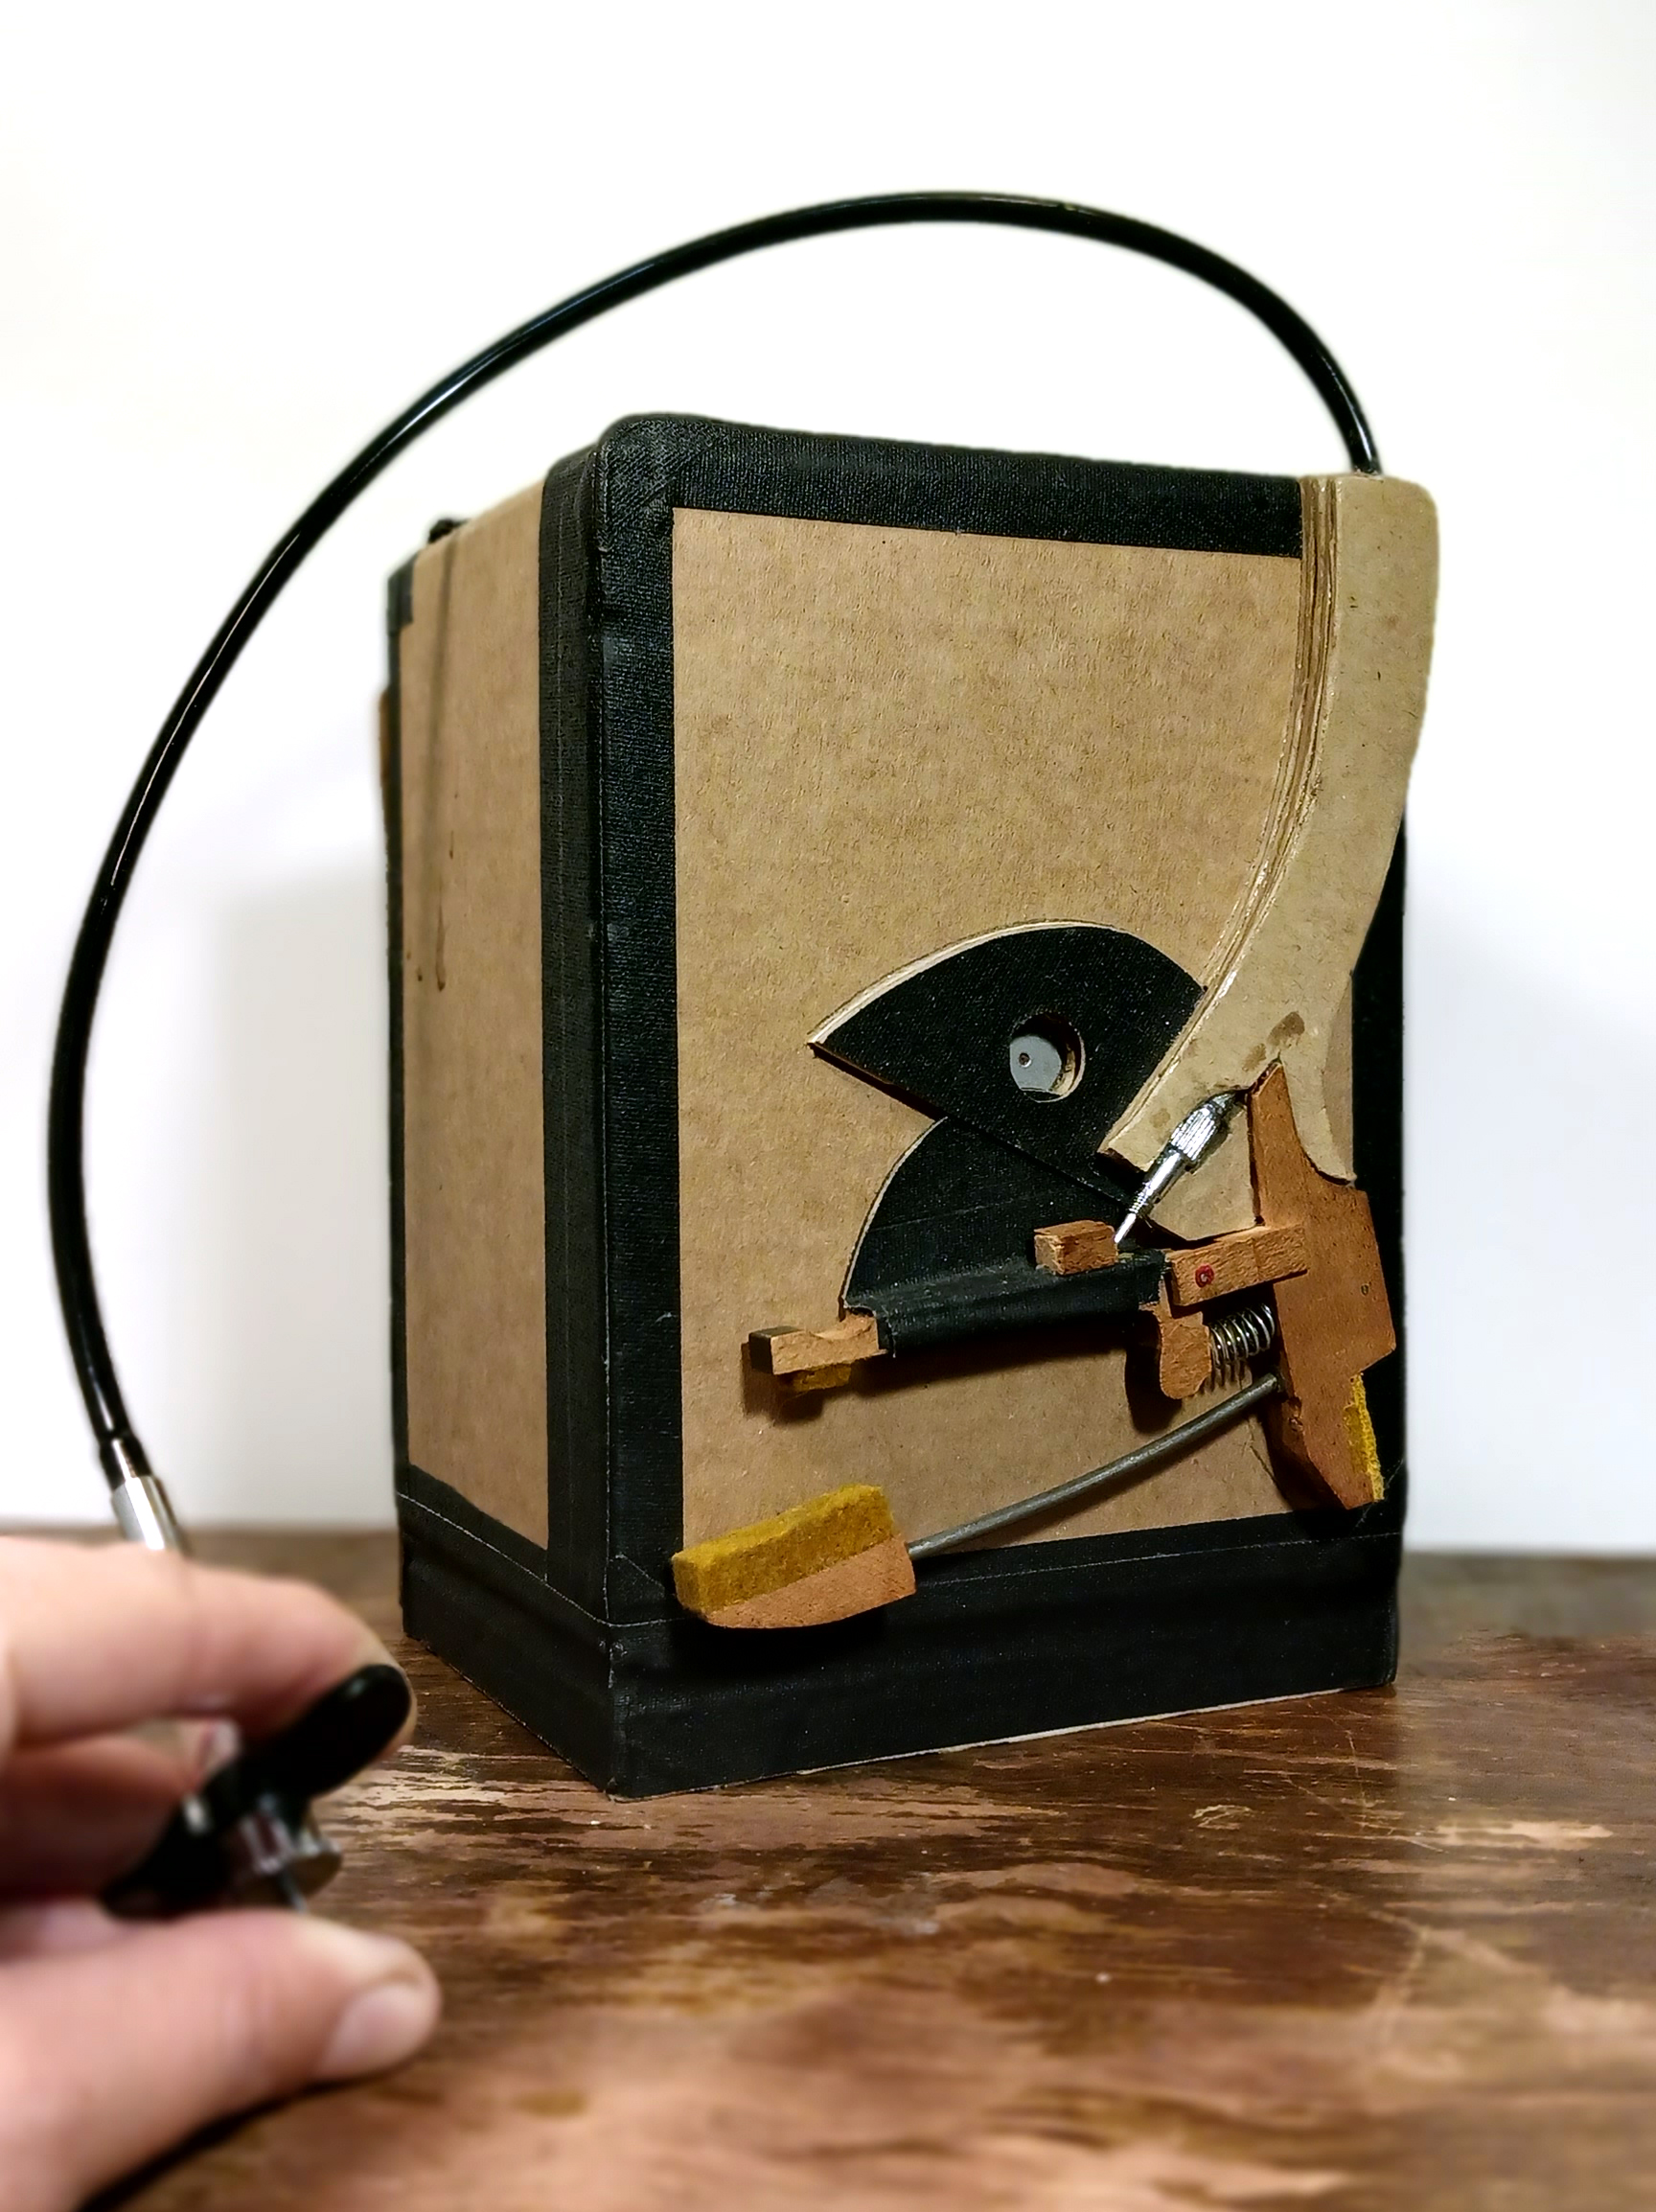 Precision drilled pinhole built into a cardboard box, back accepts ground glass and film holders, shutter uses a spring and is made from piano pieces. 2023.